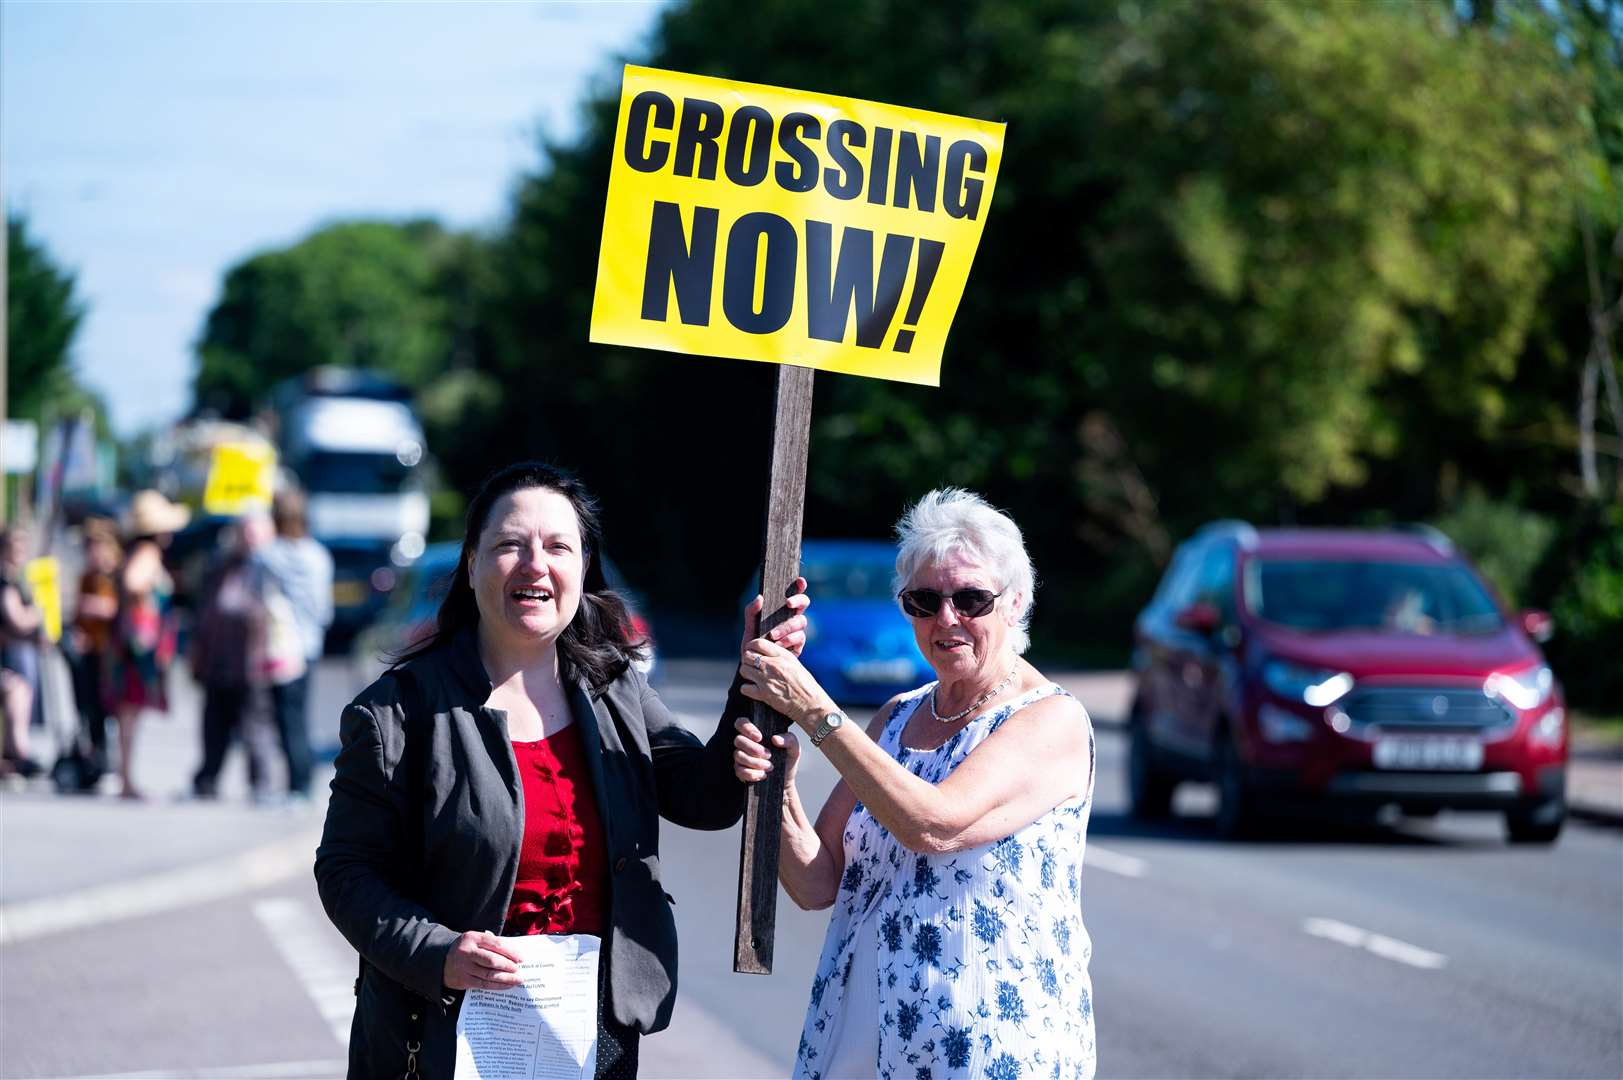 Cllr Alex Kemp (left) joined the protestors who also called for a crossing on the A10. Pictures: Ian Burt